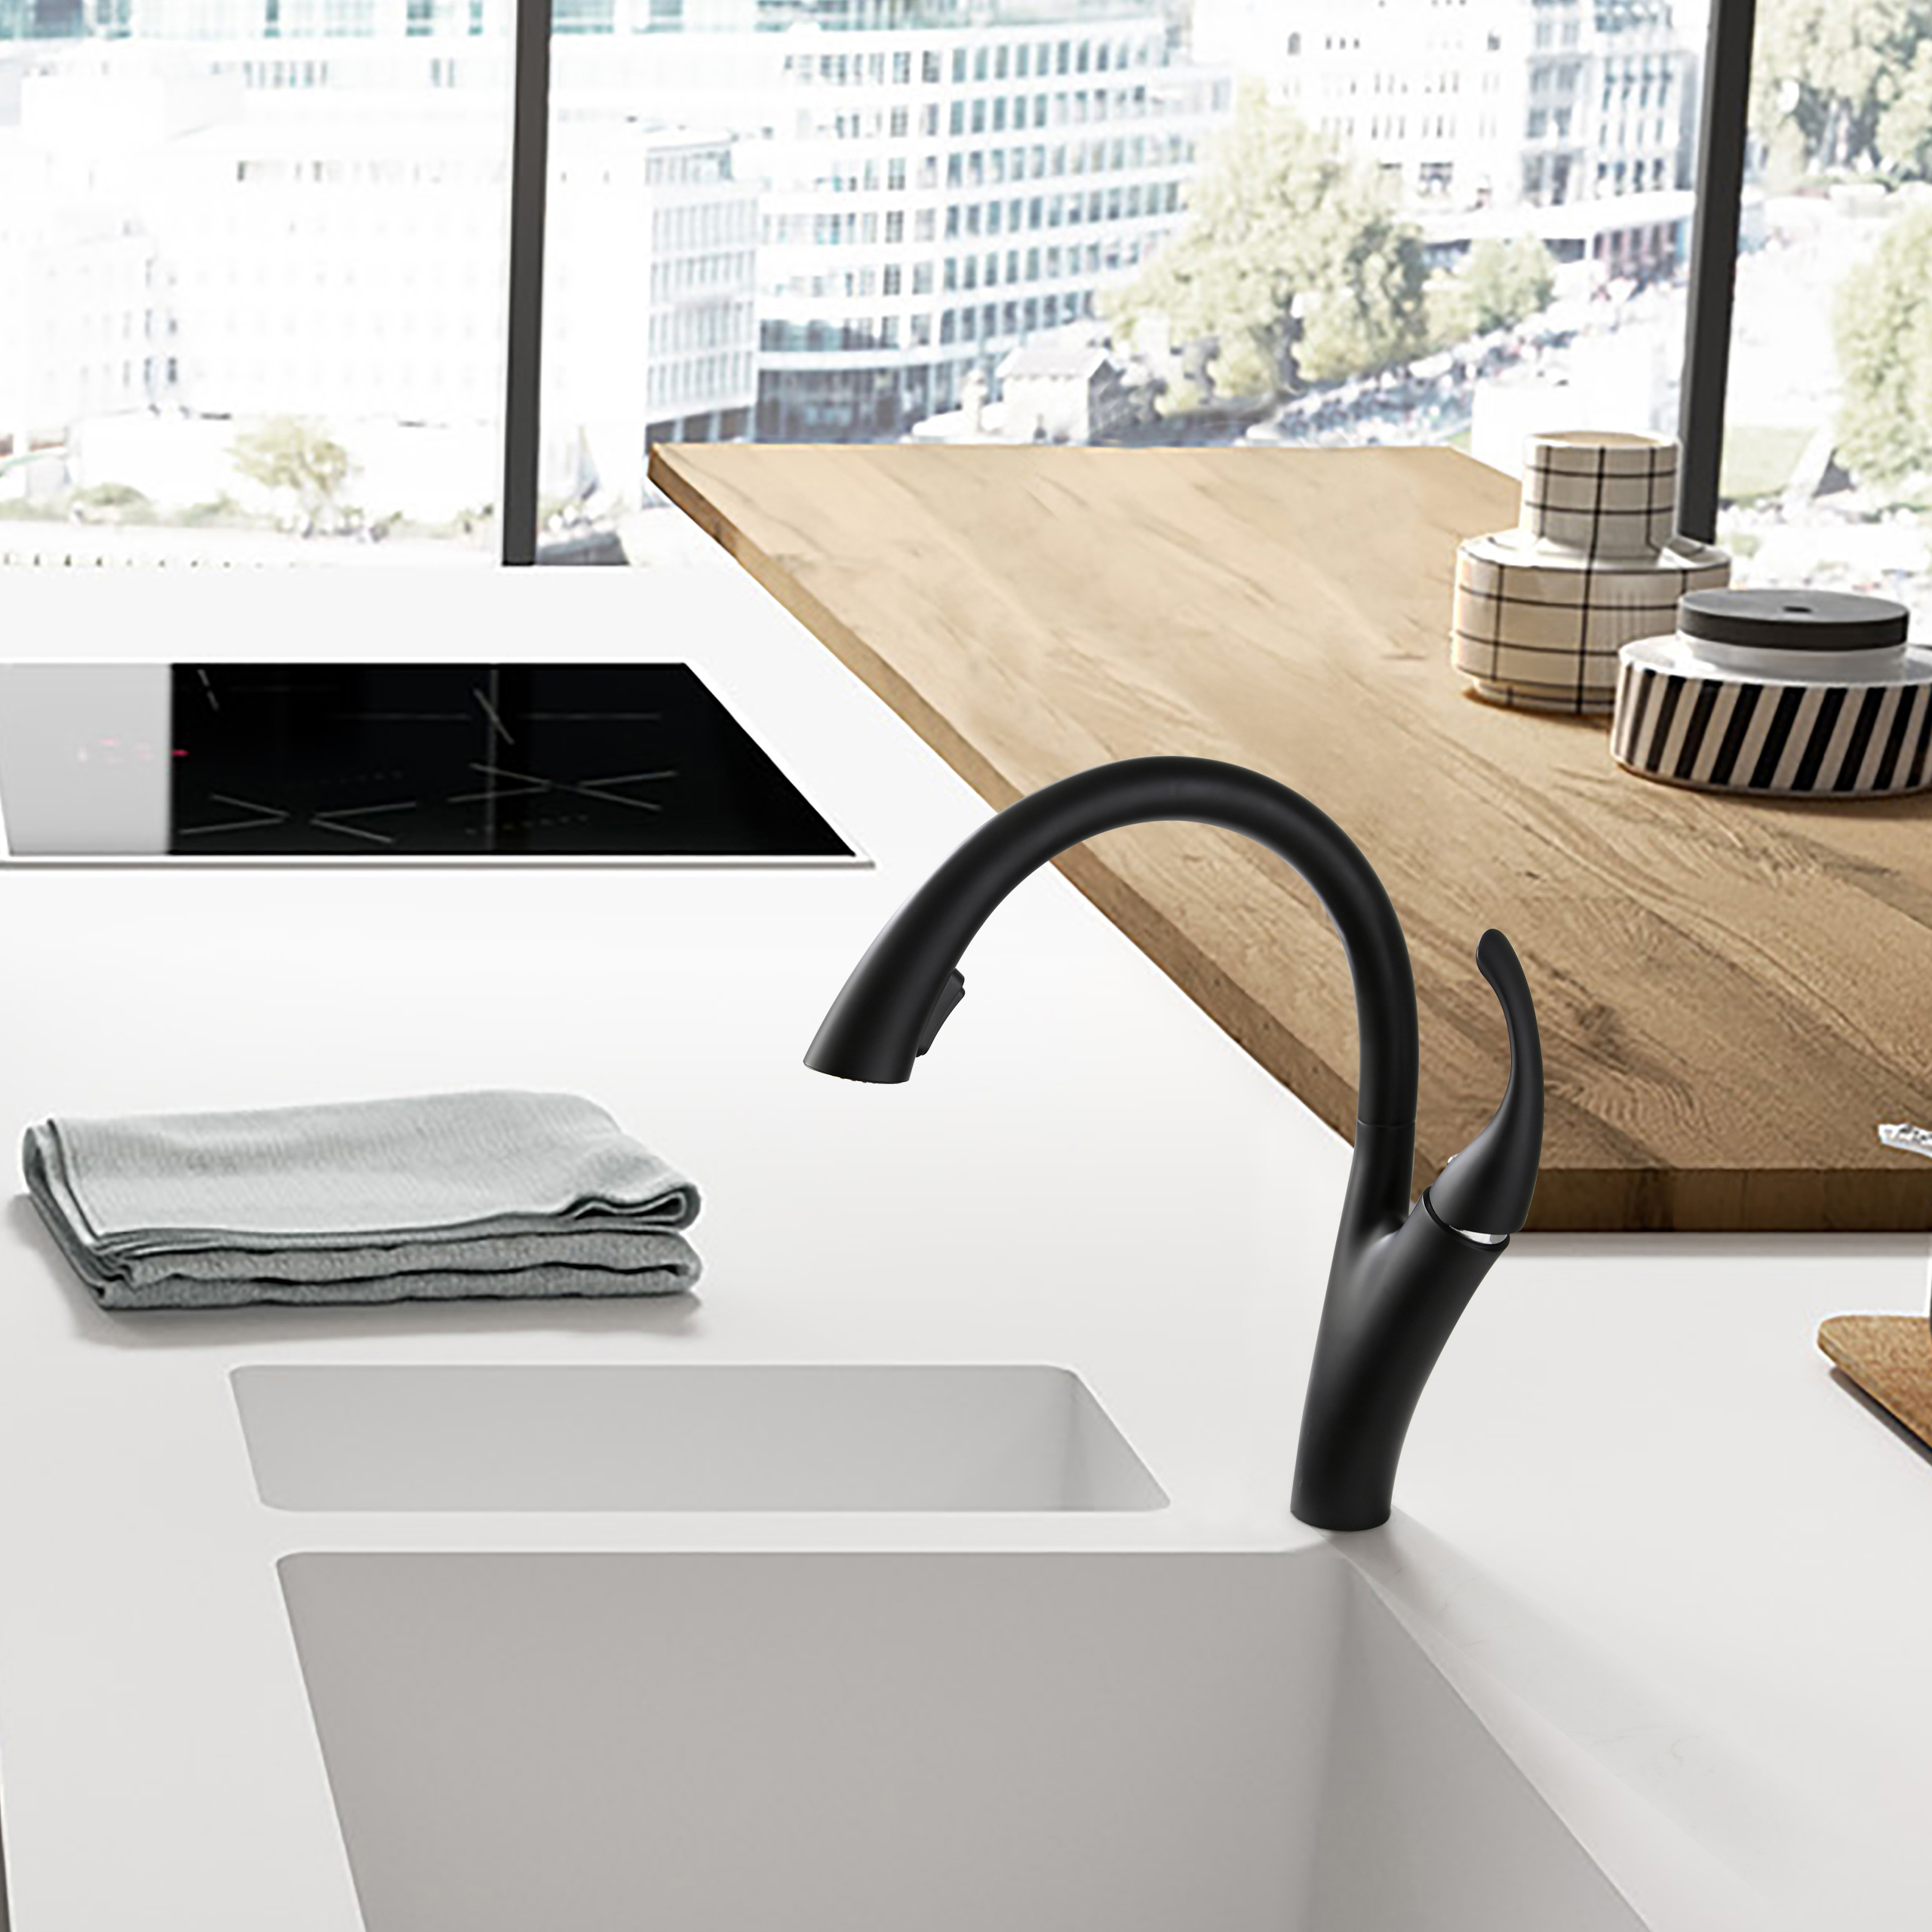 Gowo Brass 360 Faucet Black Kitchen Tap With High Quality